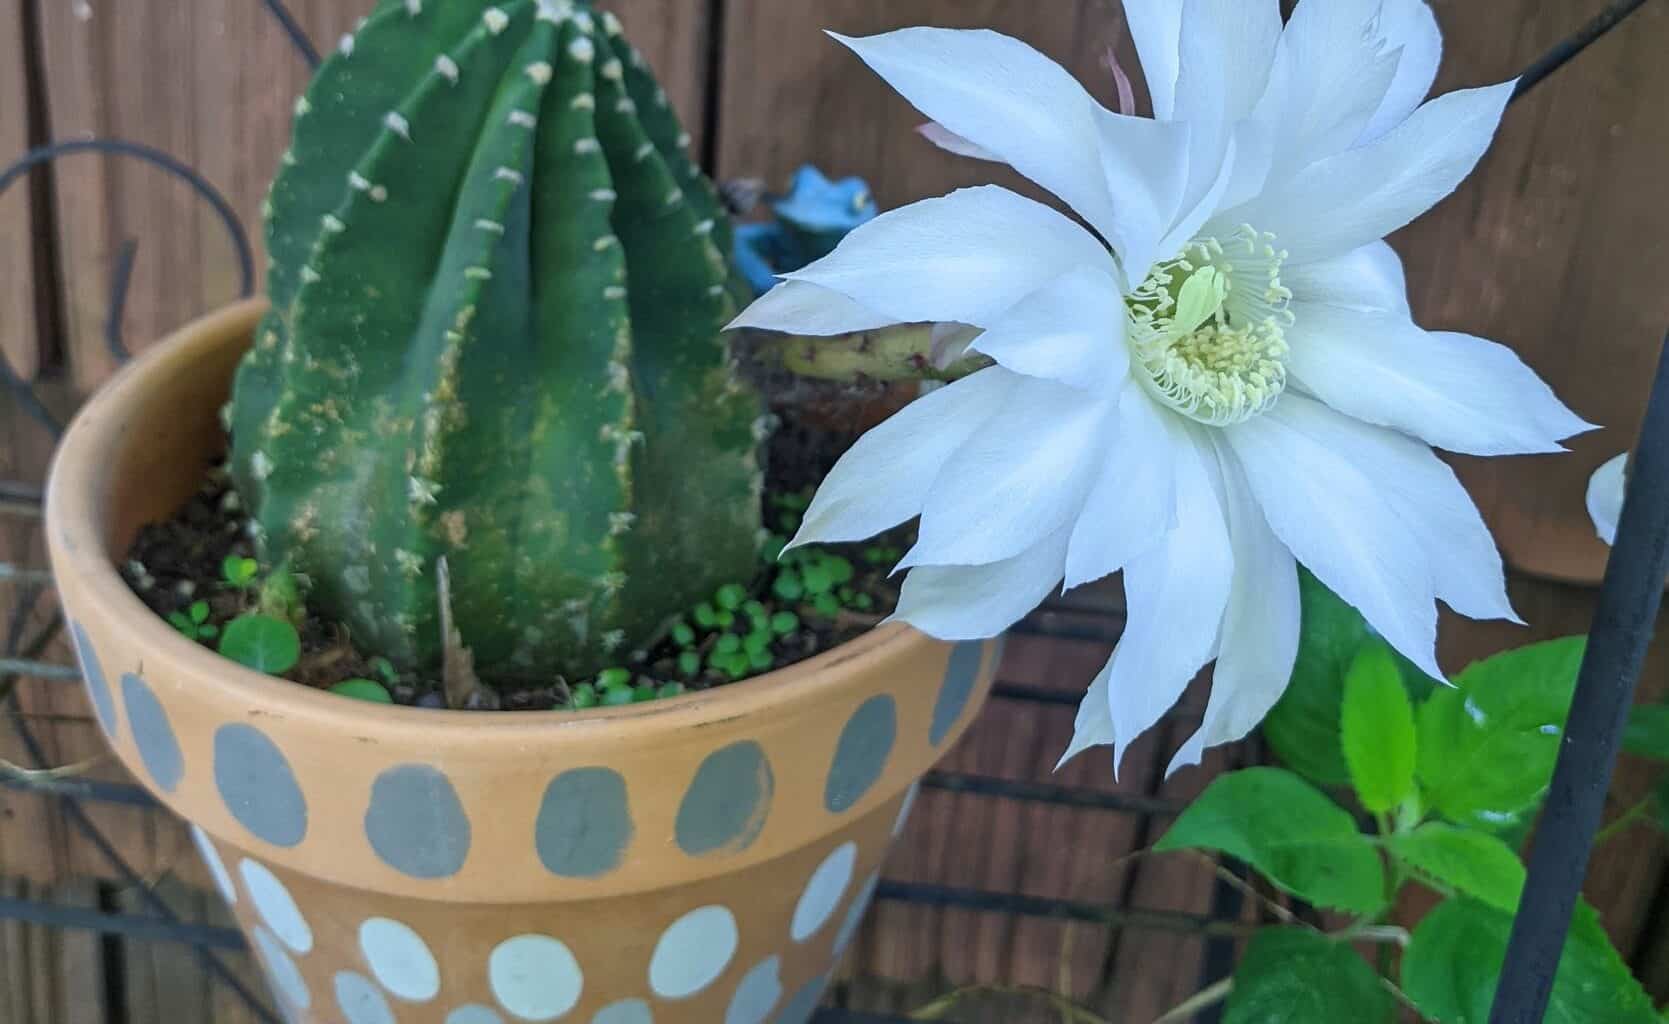 A hanging pot containing Domino Cactus in its full bloom with a white flower on the top.